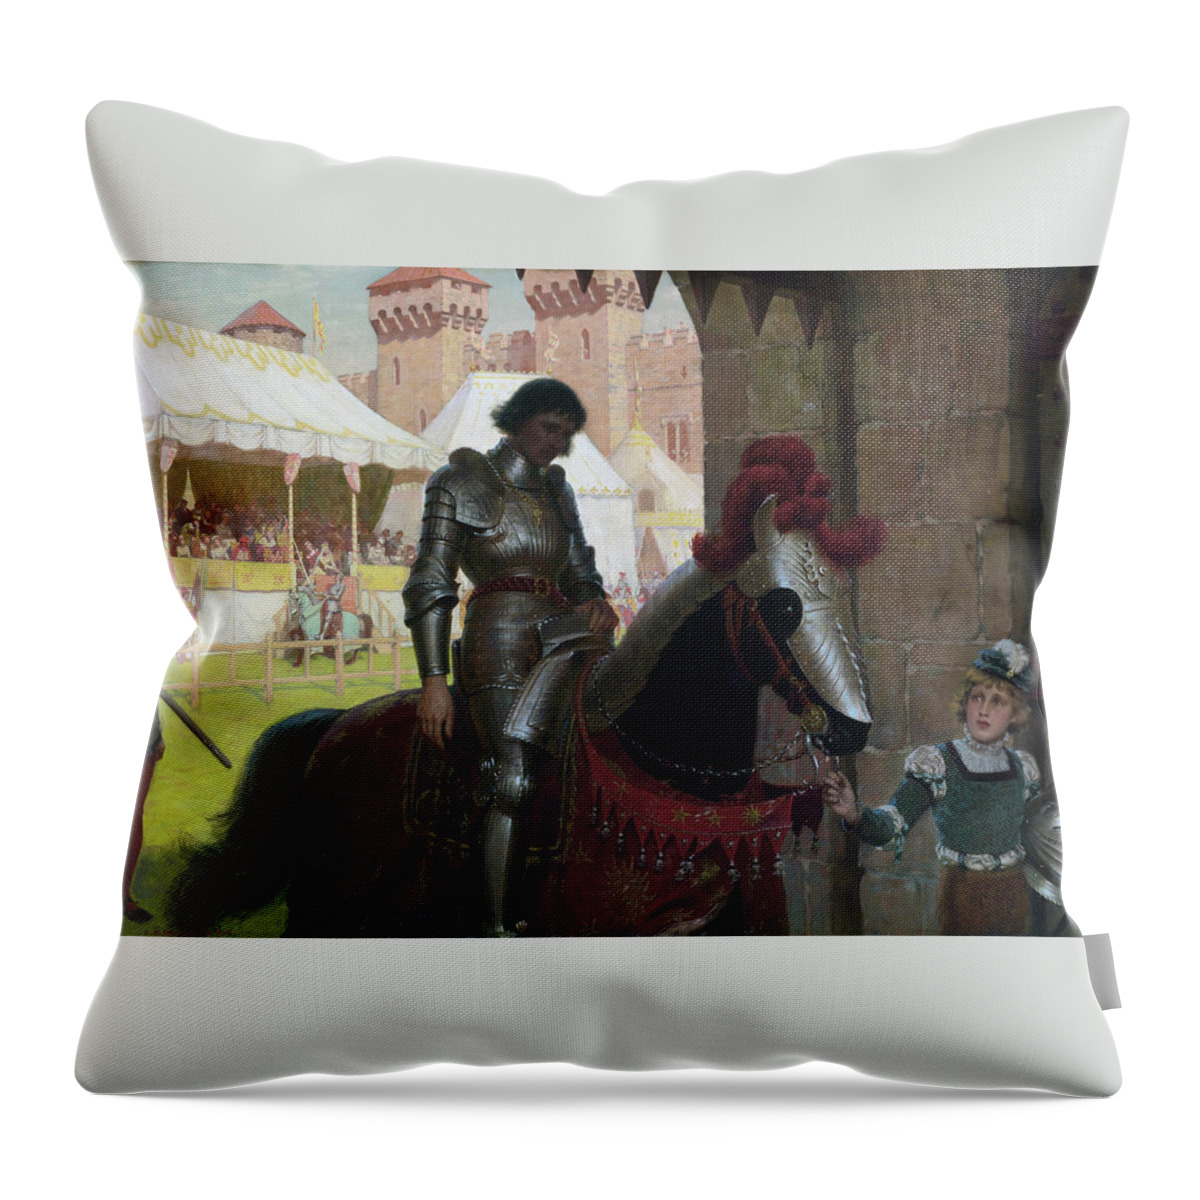 Vanquished Throw Pillow featuring the painting Vanquished by MotionAge Designs